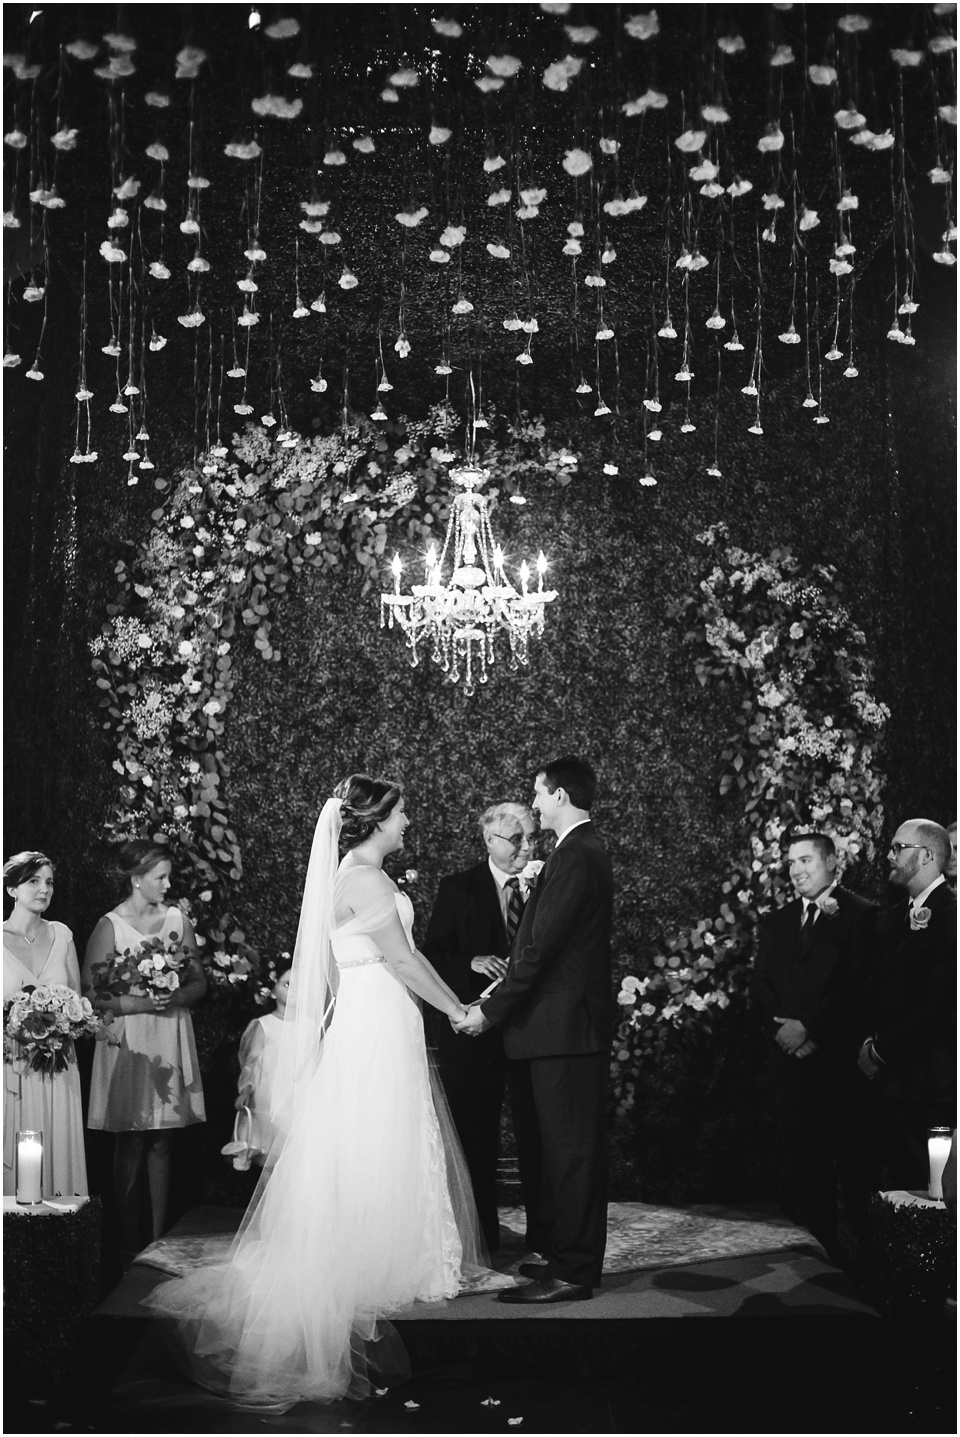 central illinois wedding photographer, Bloomington Illinois Wedding Ceremony with grass wall and flowers hanging from ceiling by Rachael Schirano